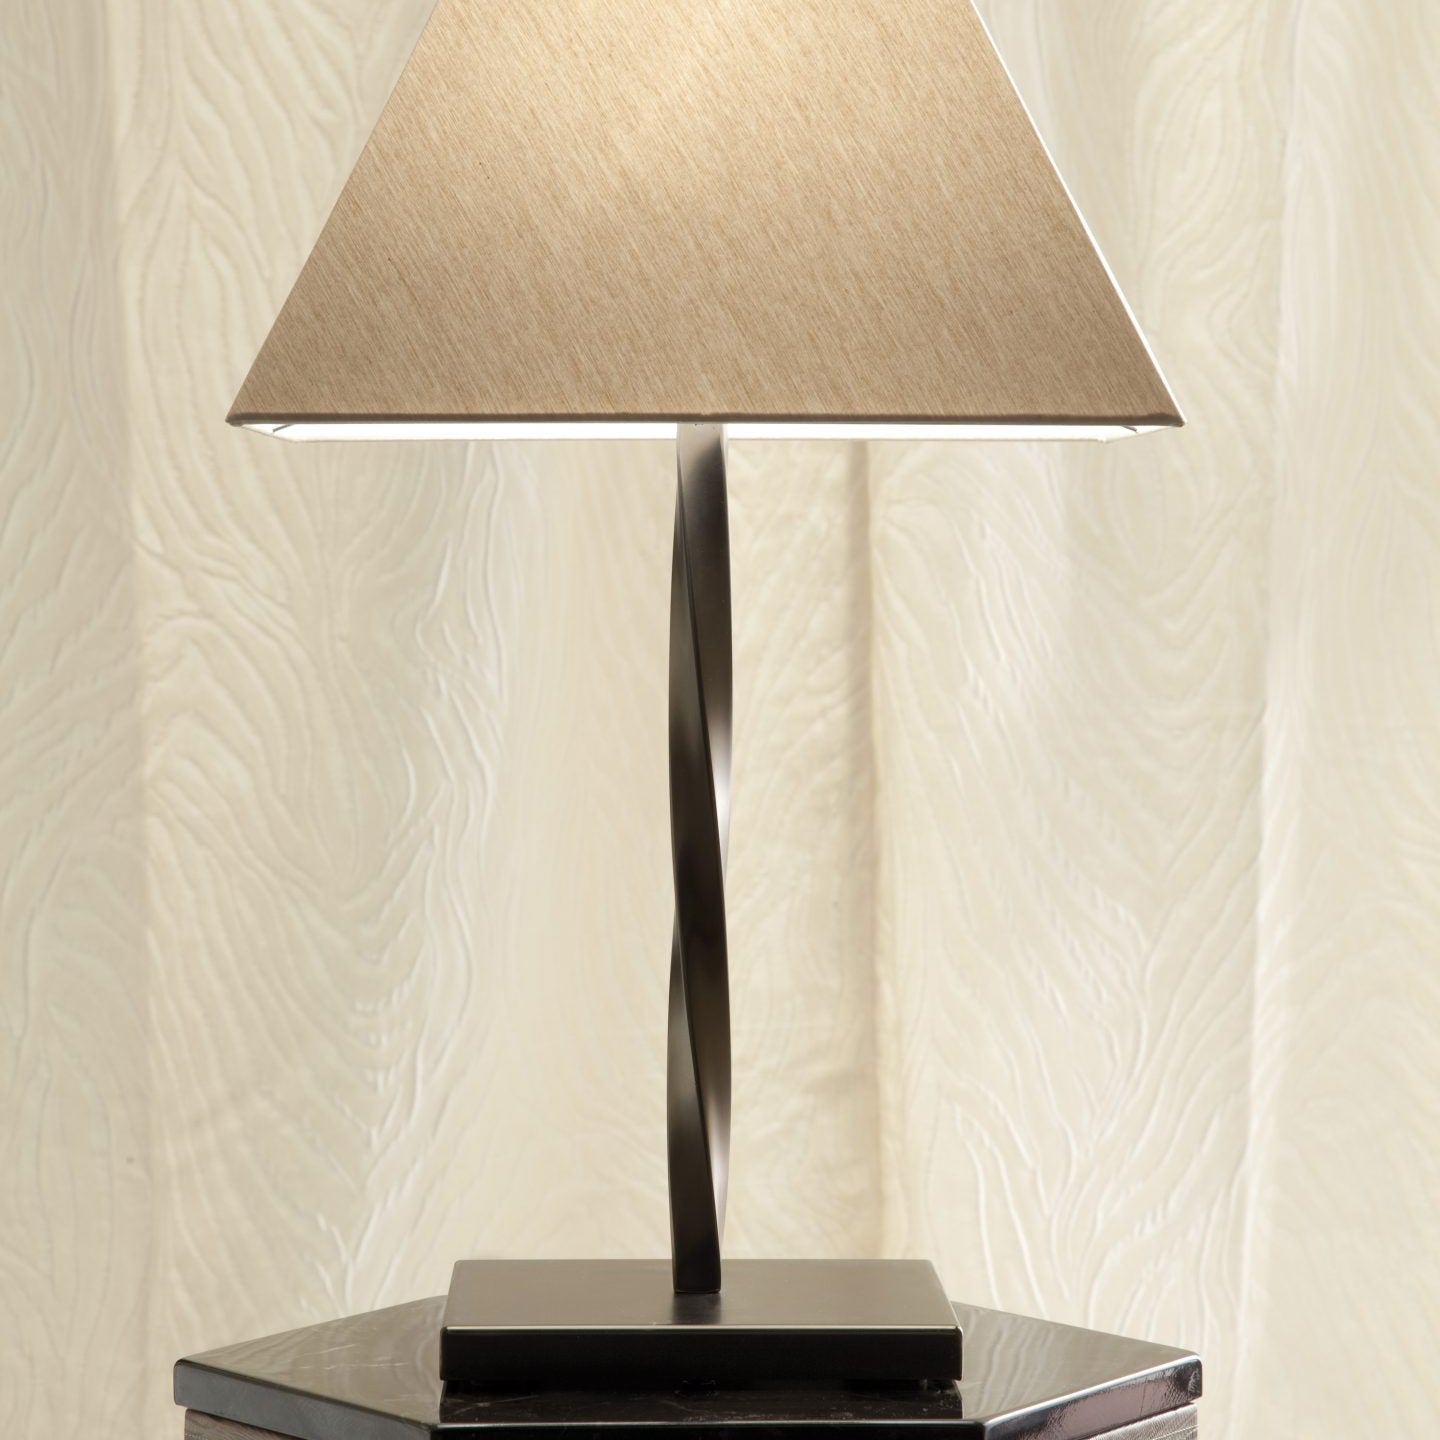 TWISTED table lamp